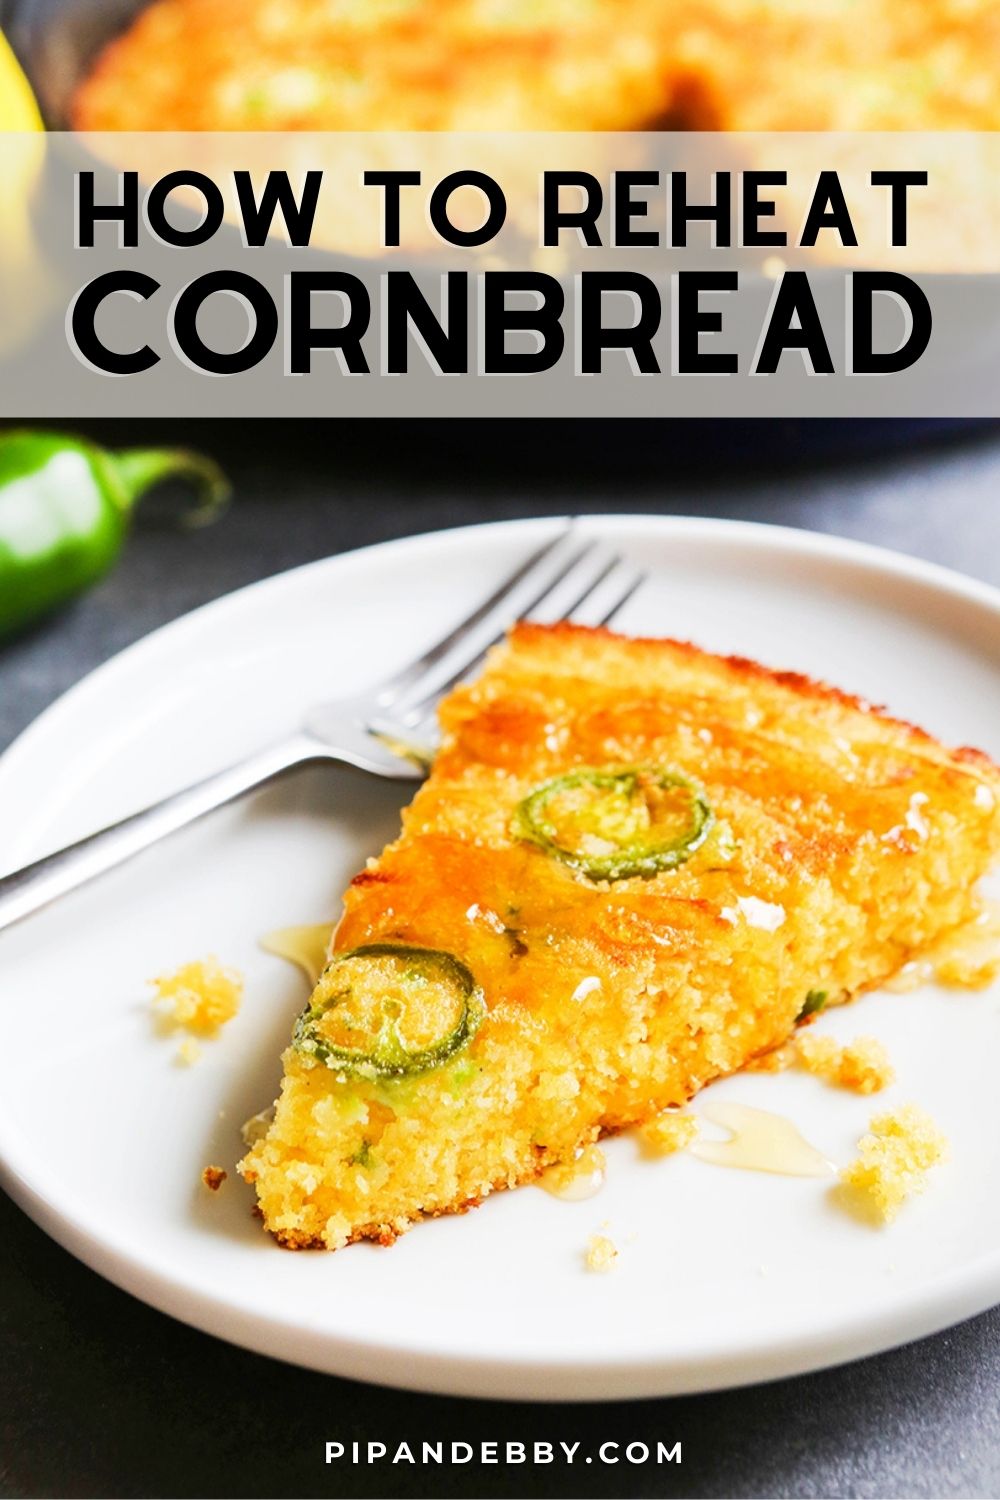 Photo of a piece of cornbread with text overlay reading, "How to reheat cornbread."